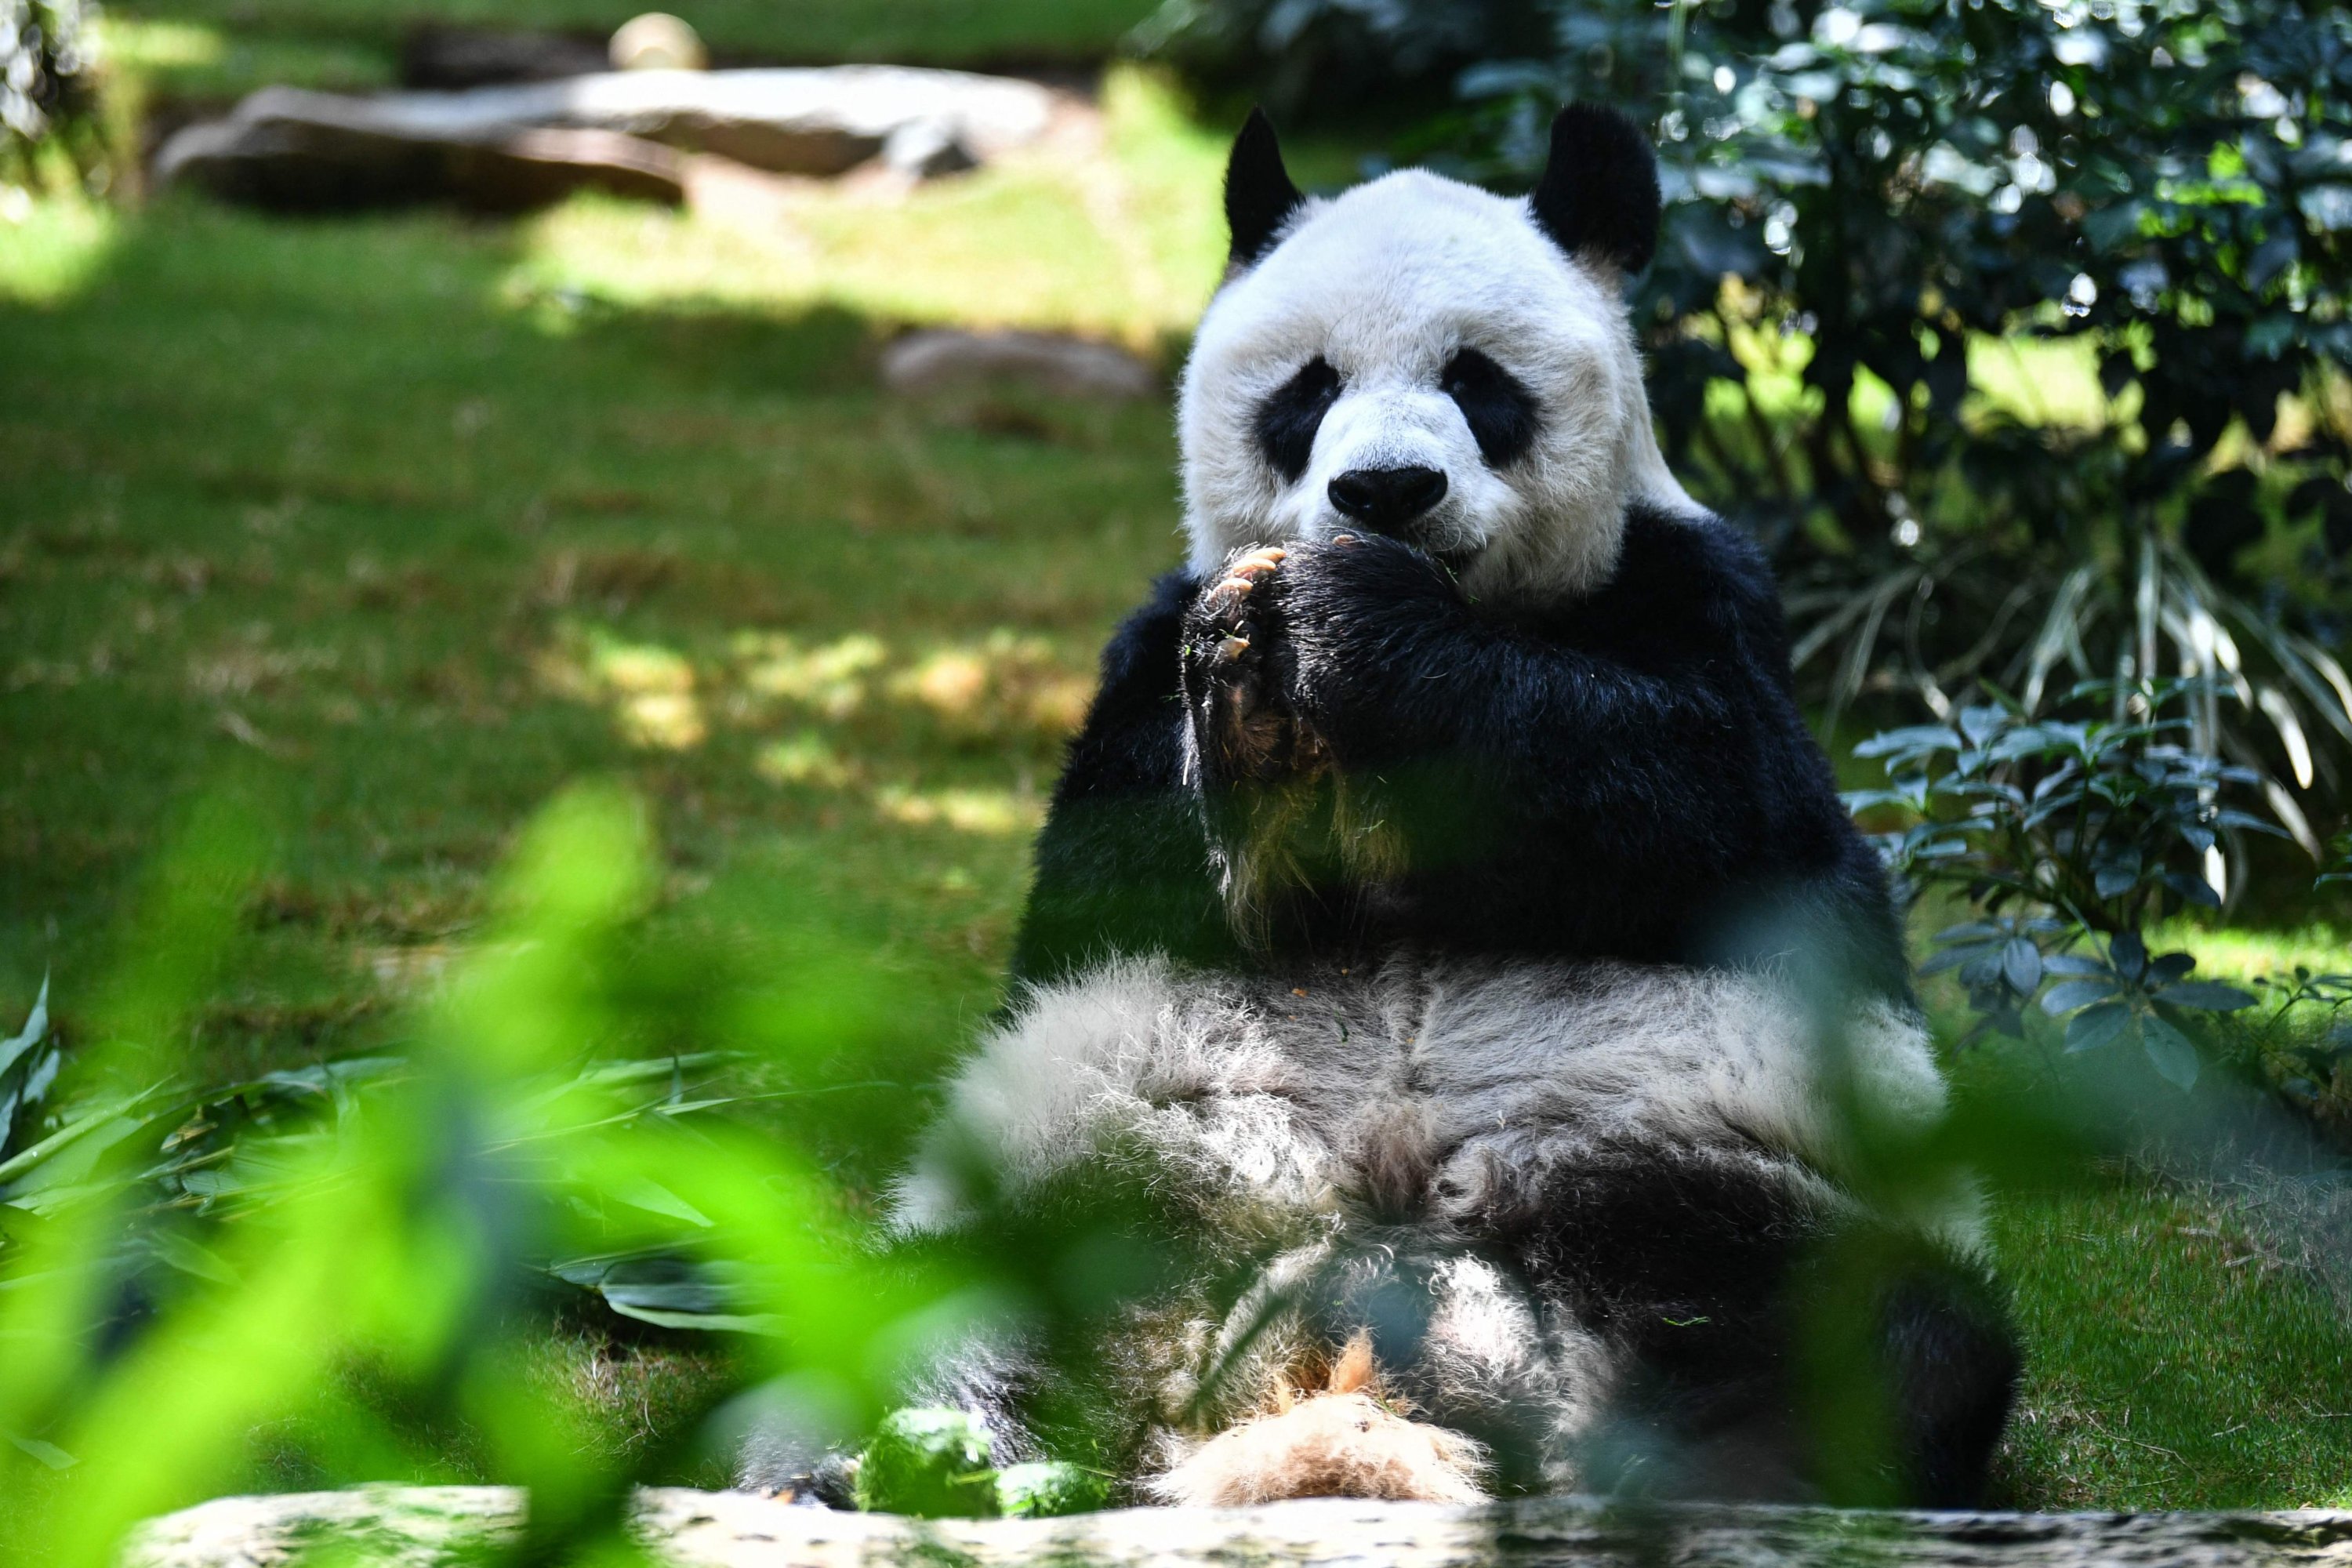 In this file photo taken on May 19, 2020, giant panda An An eats snacks in his enclosure at the currently closed local theme park Ocean Park in Hong Kong. (AFP Photo)